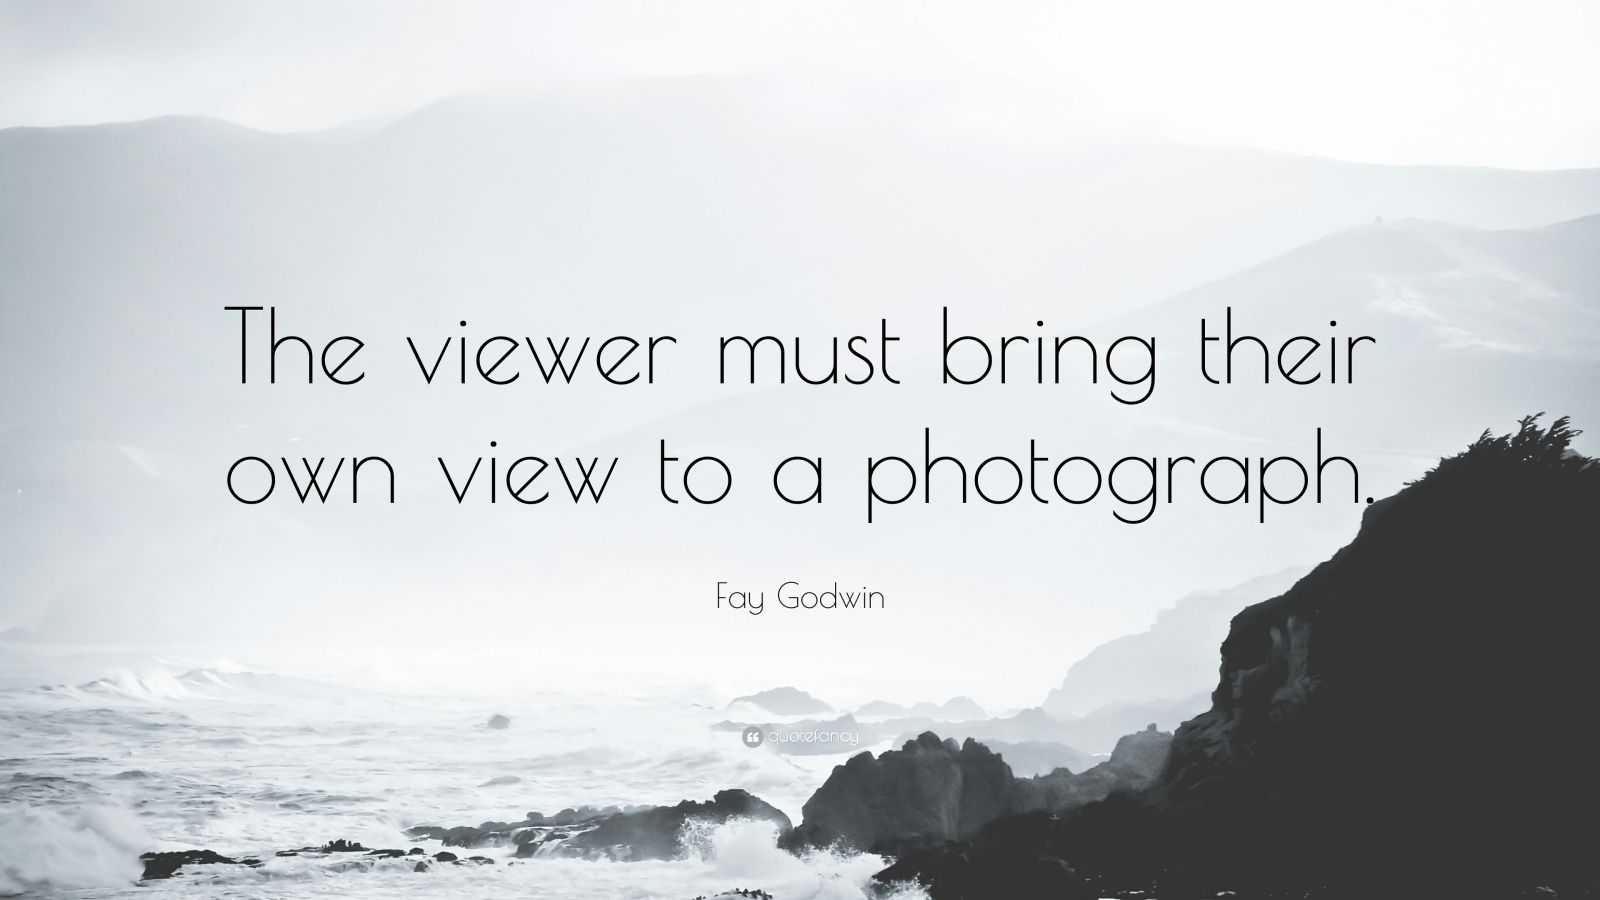 Top 15 Fay Godwin Quotes | 2021 Edition | Free Images - QuoteFancy